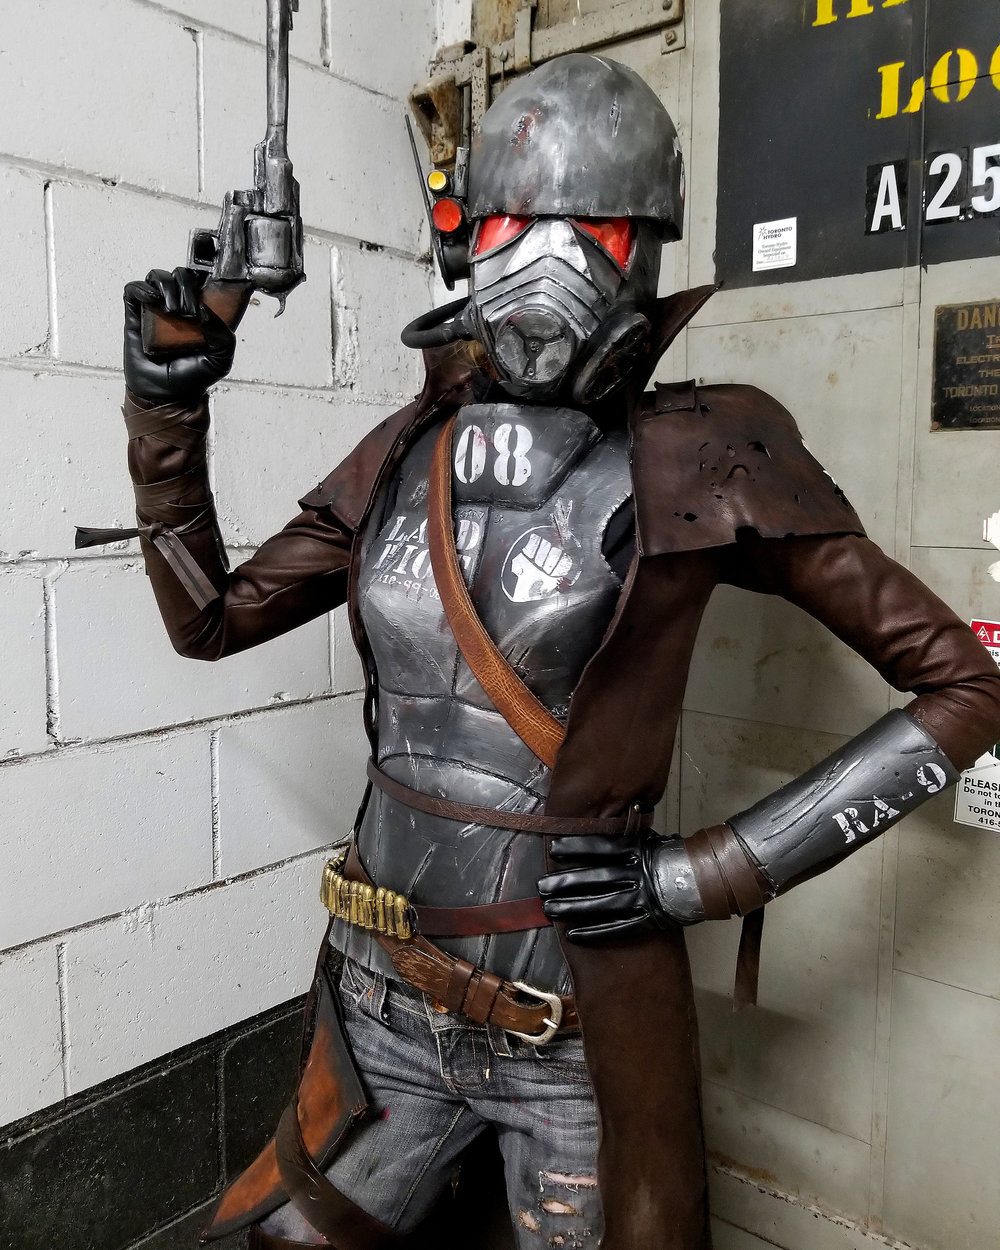 Fallout New Vegas Ncr Cosplay.